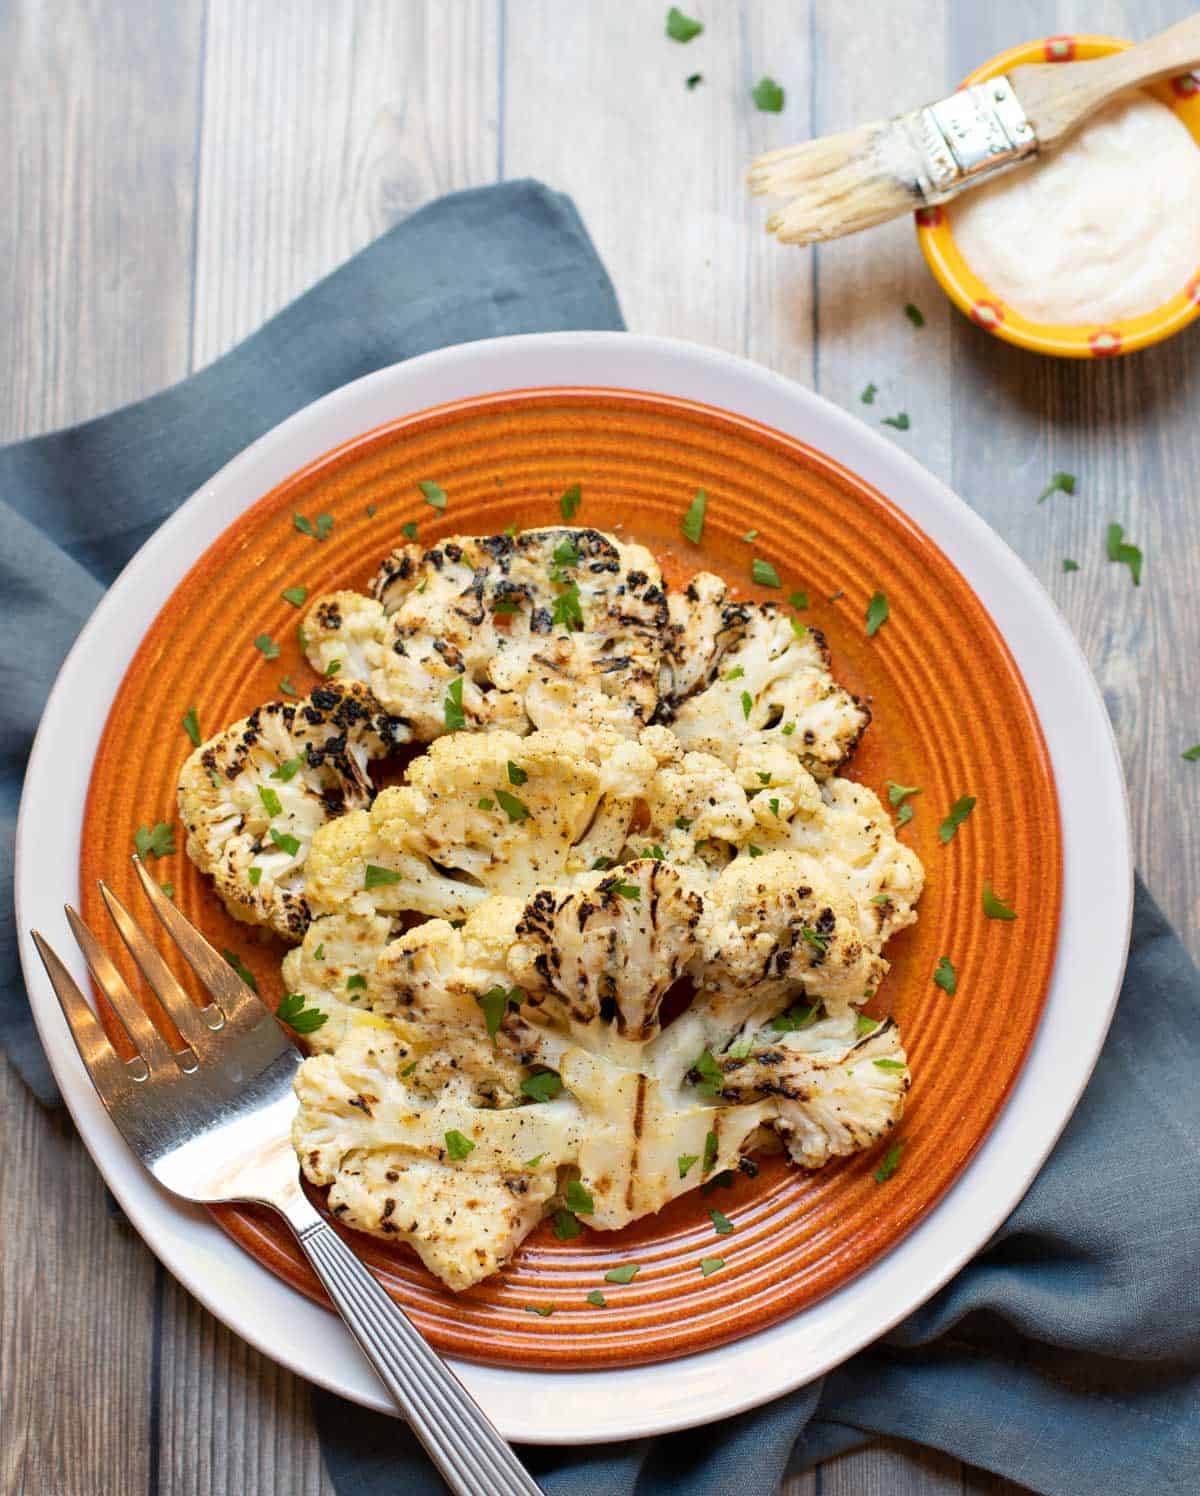 Grilled slices of cauliflower with a tangy Parmesan sauce